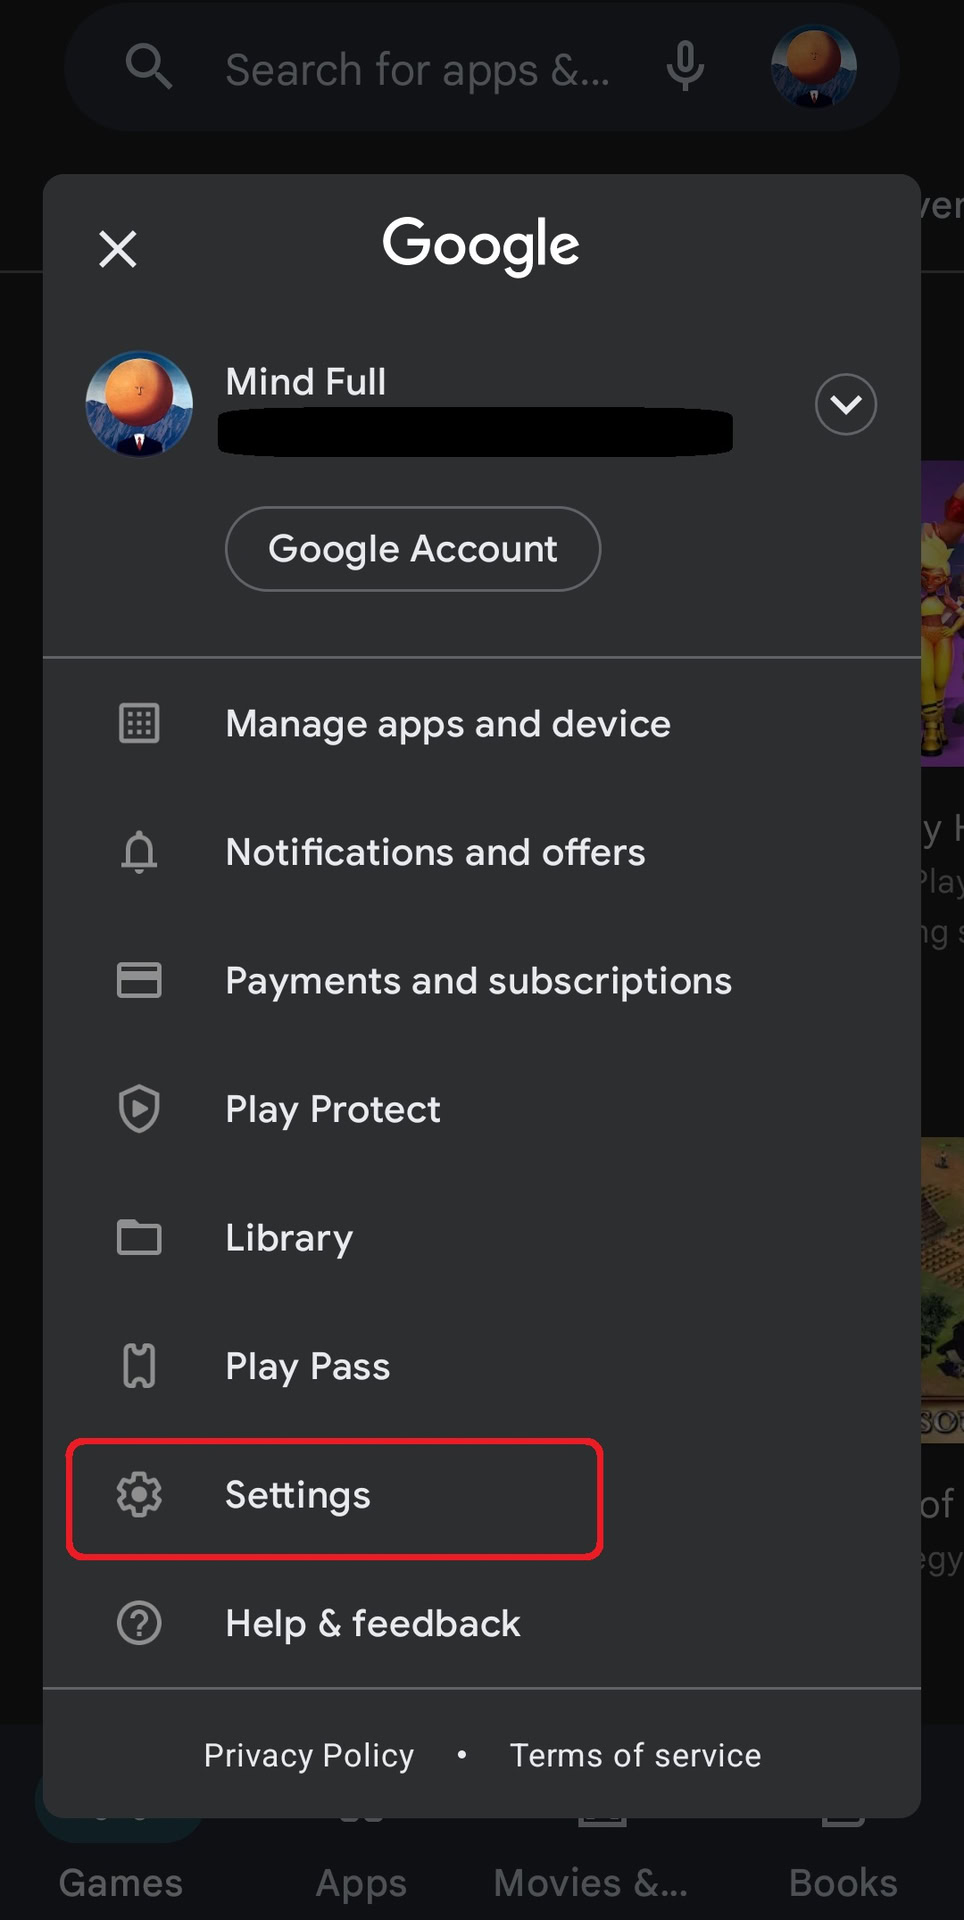 How to Install Apps from Play Store without Google Account?